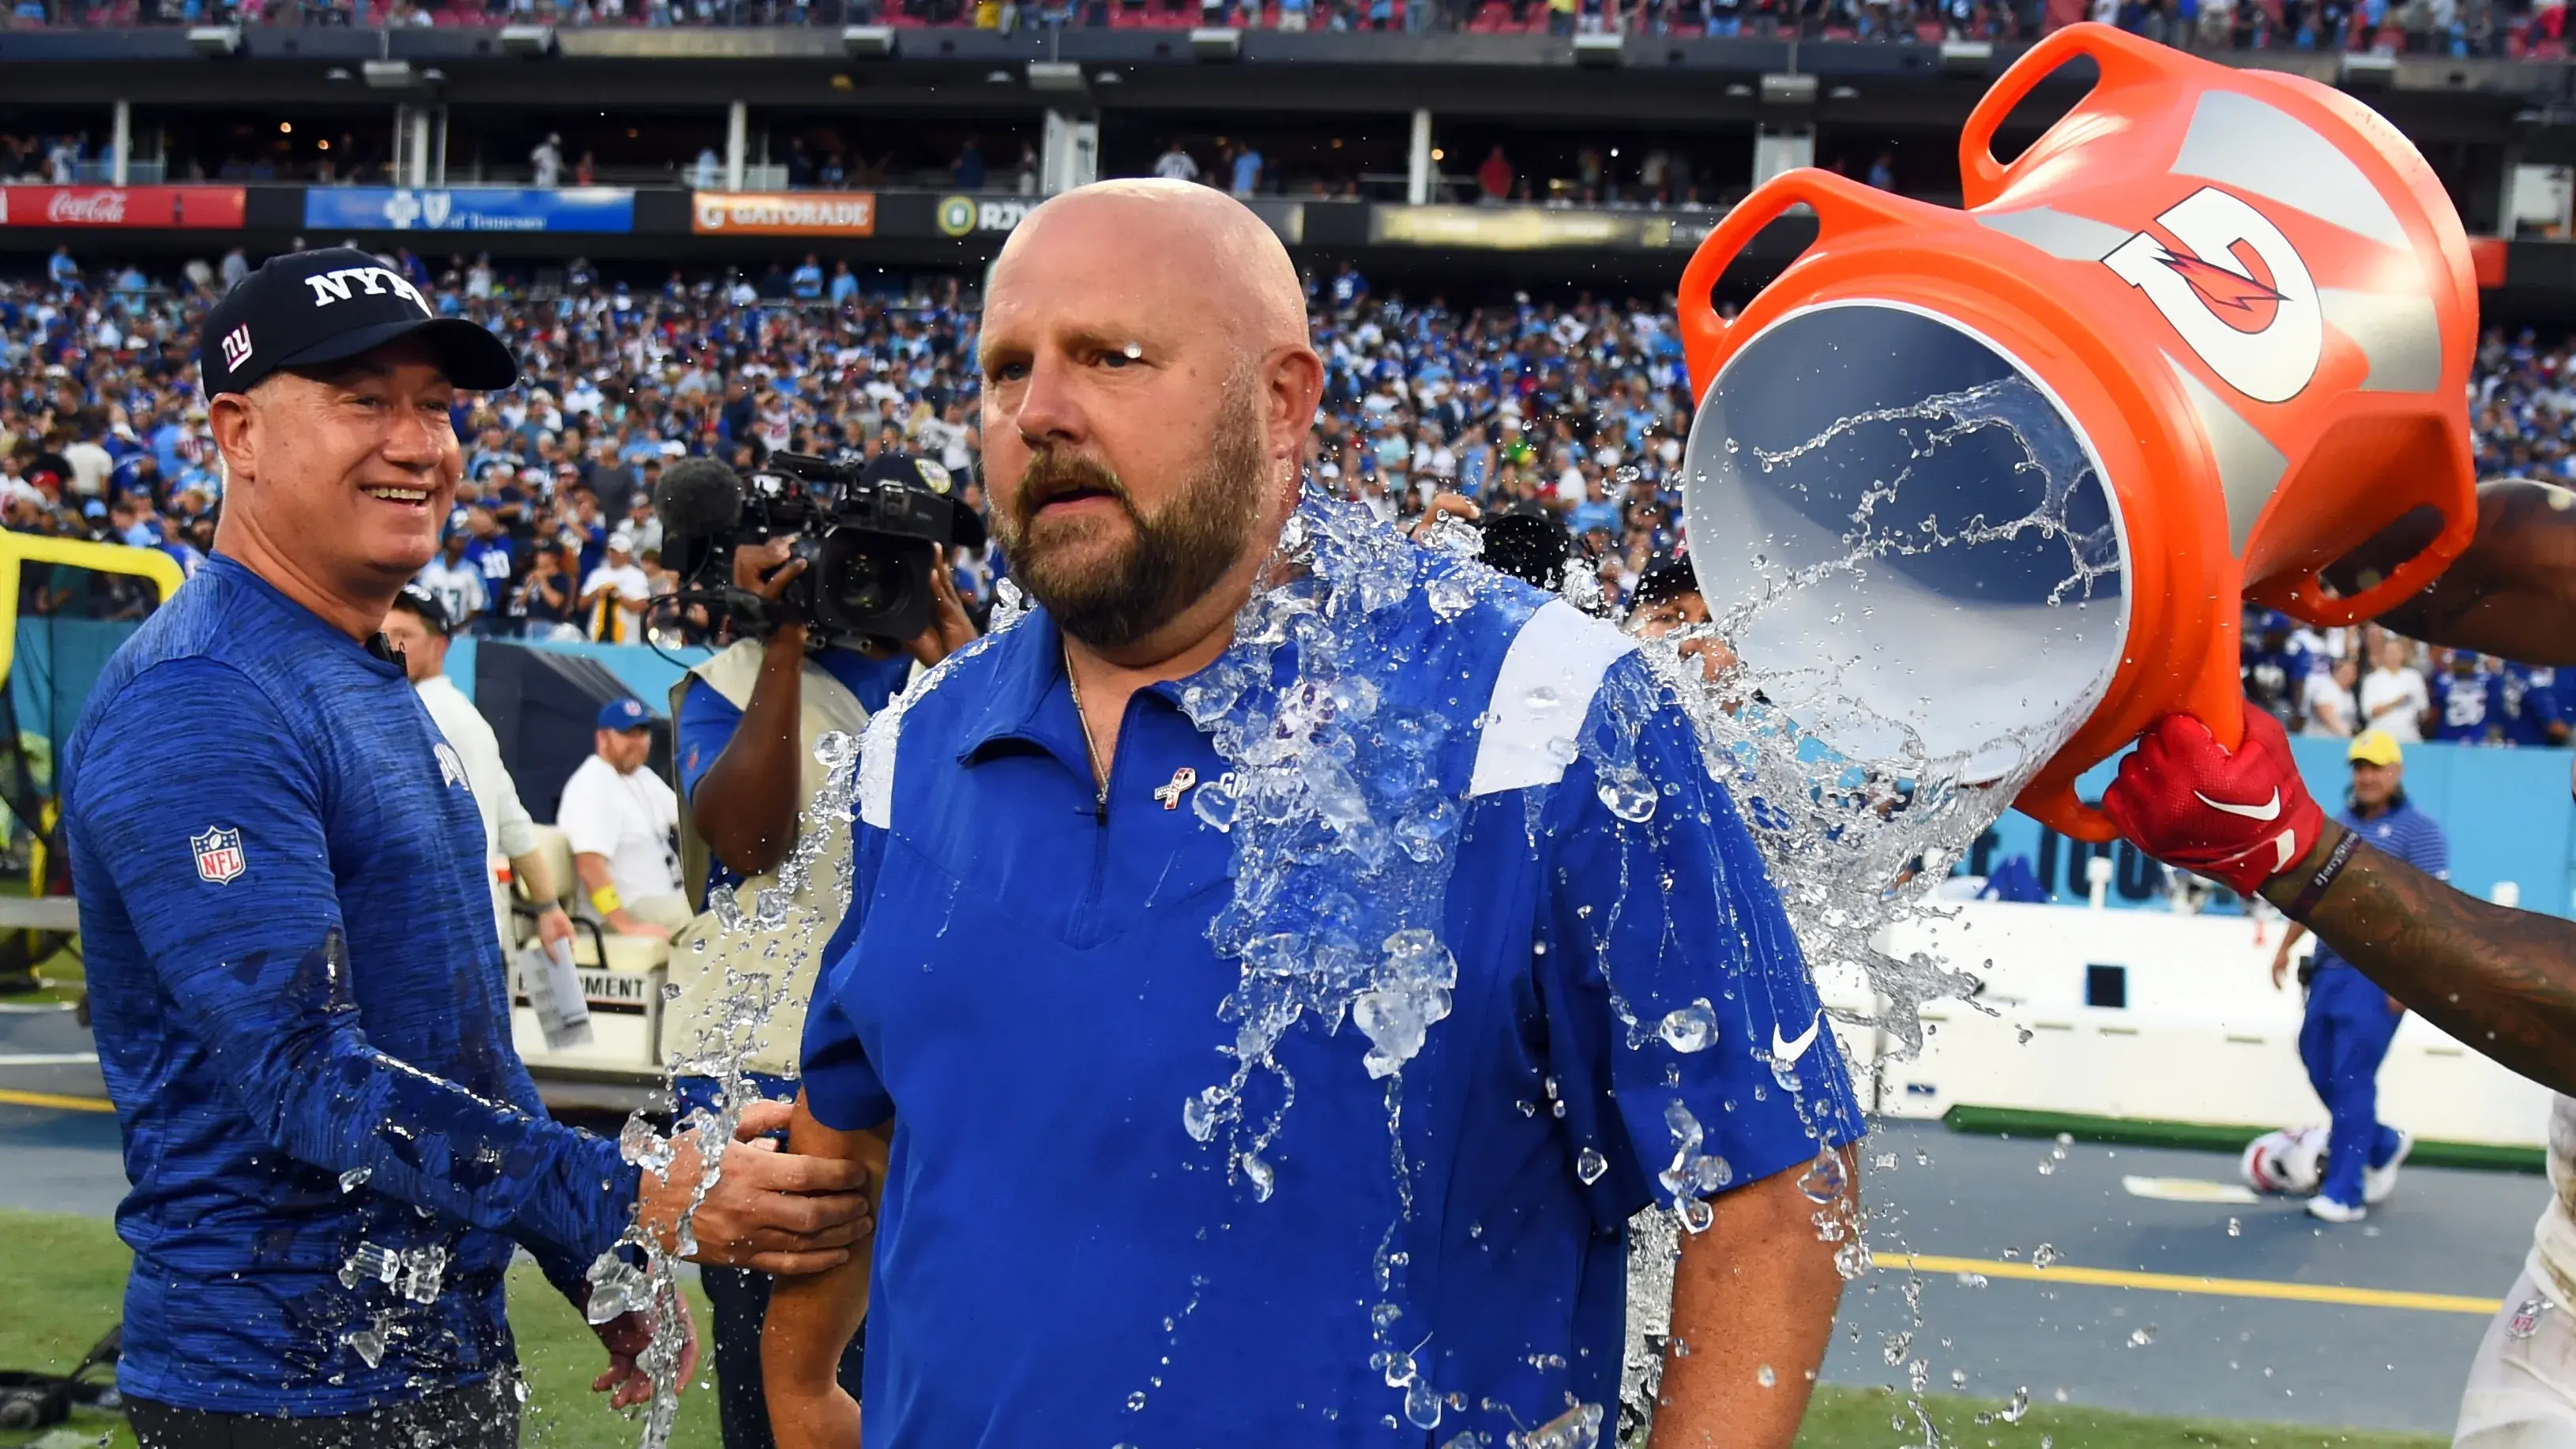 Sep 11, 2022; Nashville, Tennessee, USA; New York Giants head coach Brian Daboll receives a Gatorade bath from linebacker Oshane Ximines (53) after a win against the Tennessee Titans at Nissan Stadium. Mandatory Credit: Christopher Hanewinckel-USA TODAY Sports / © Christopher Hanewinckel-USA TODAY Sports